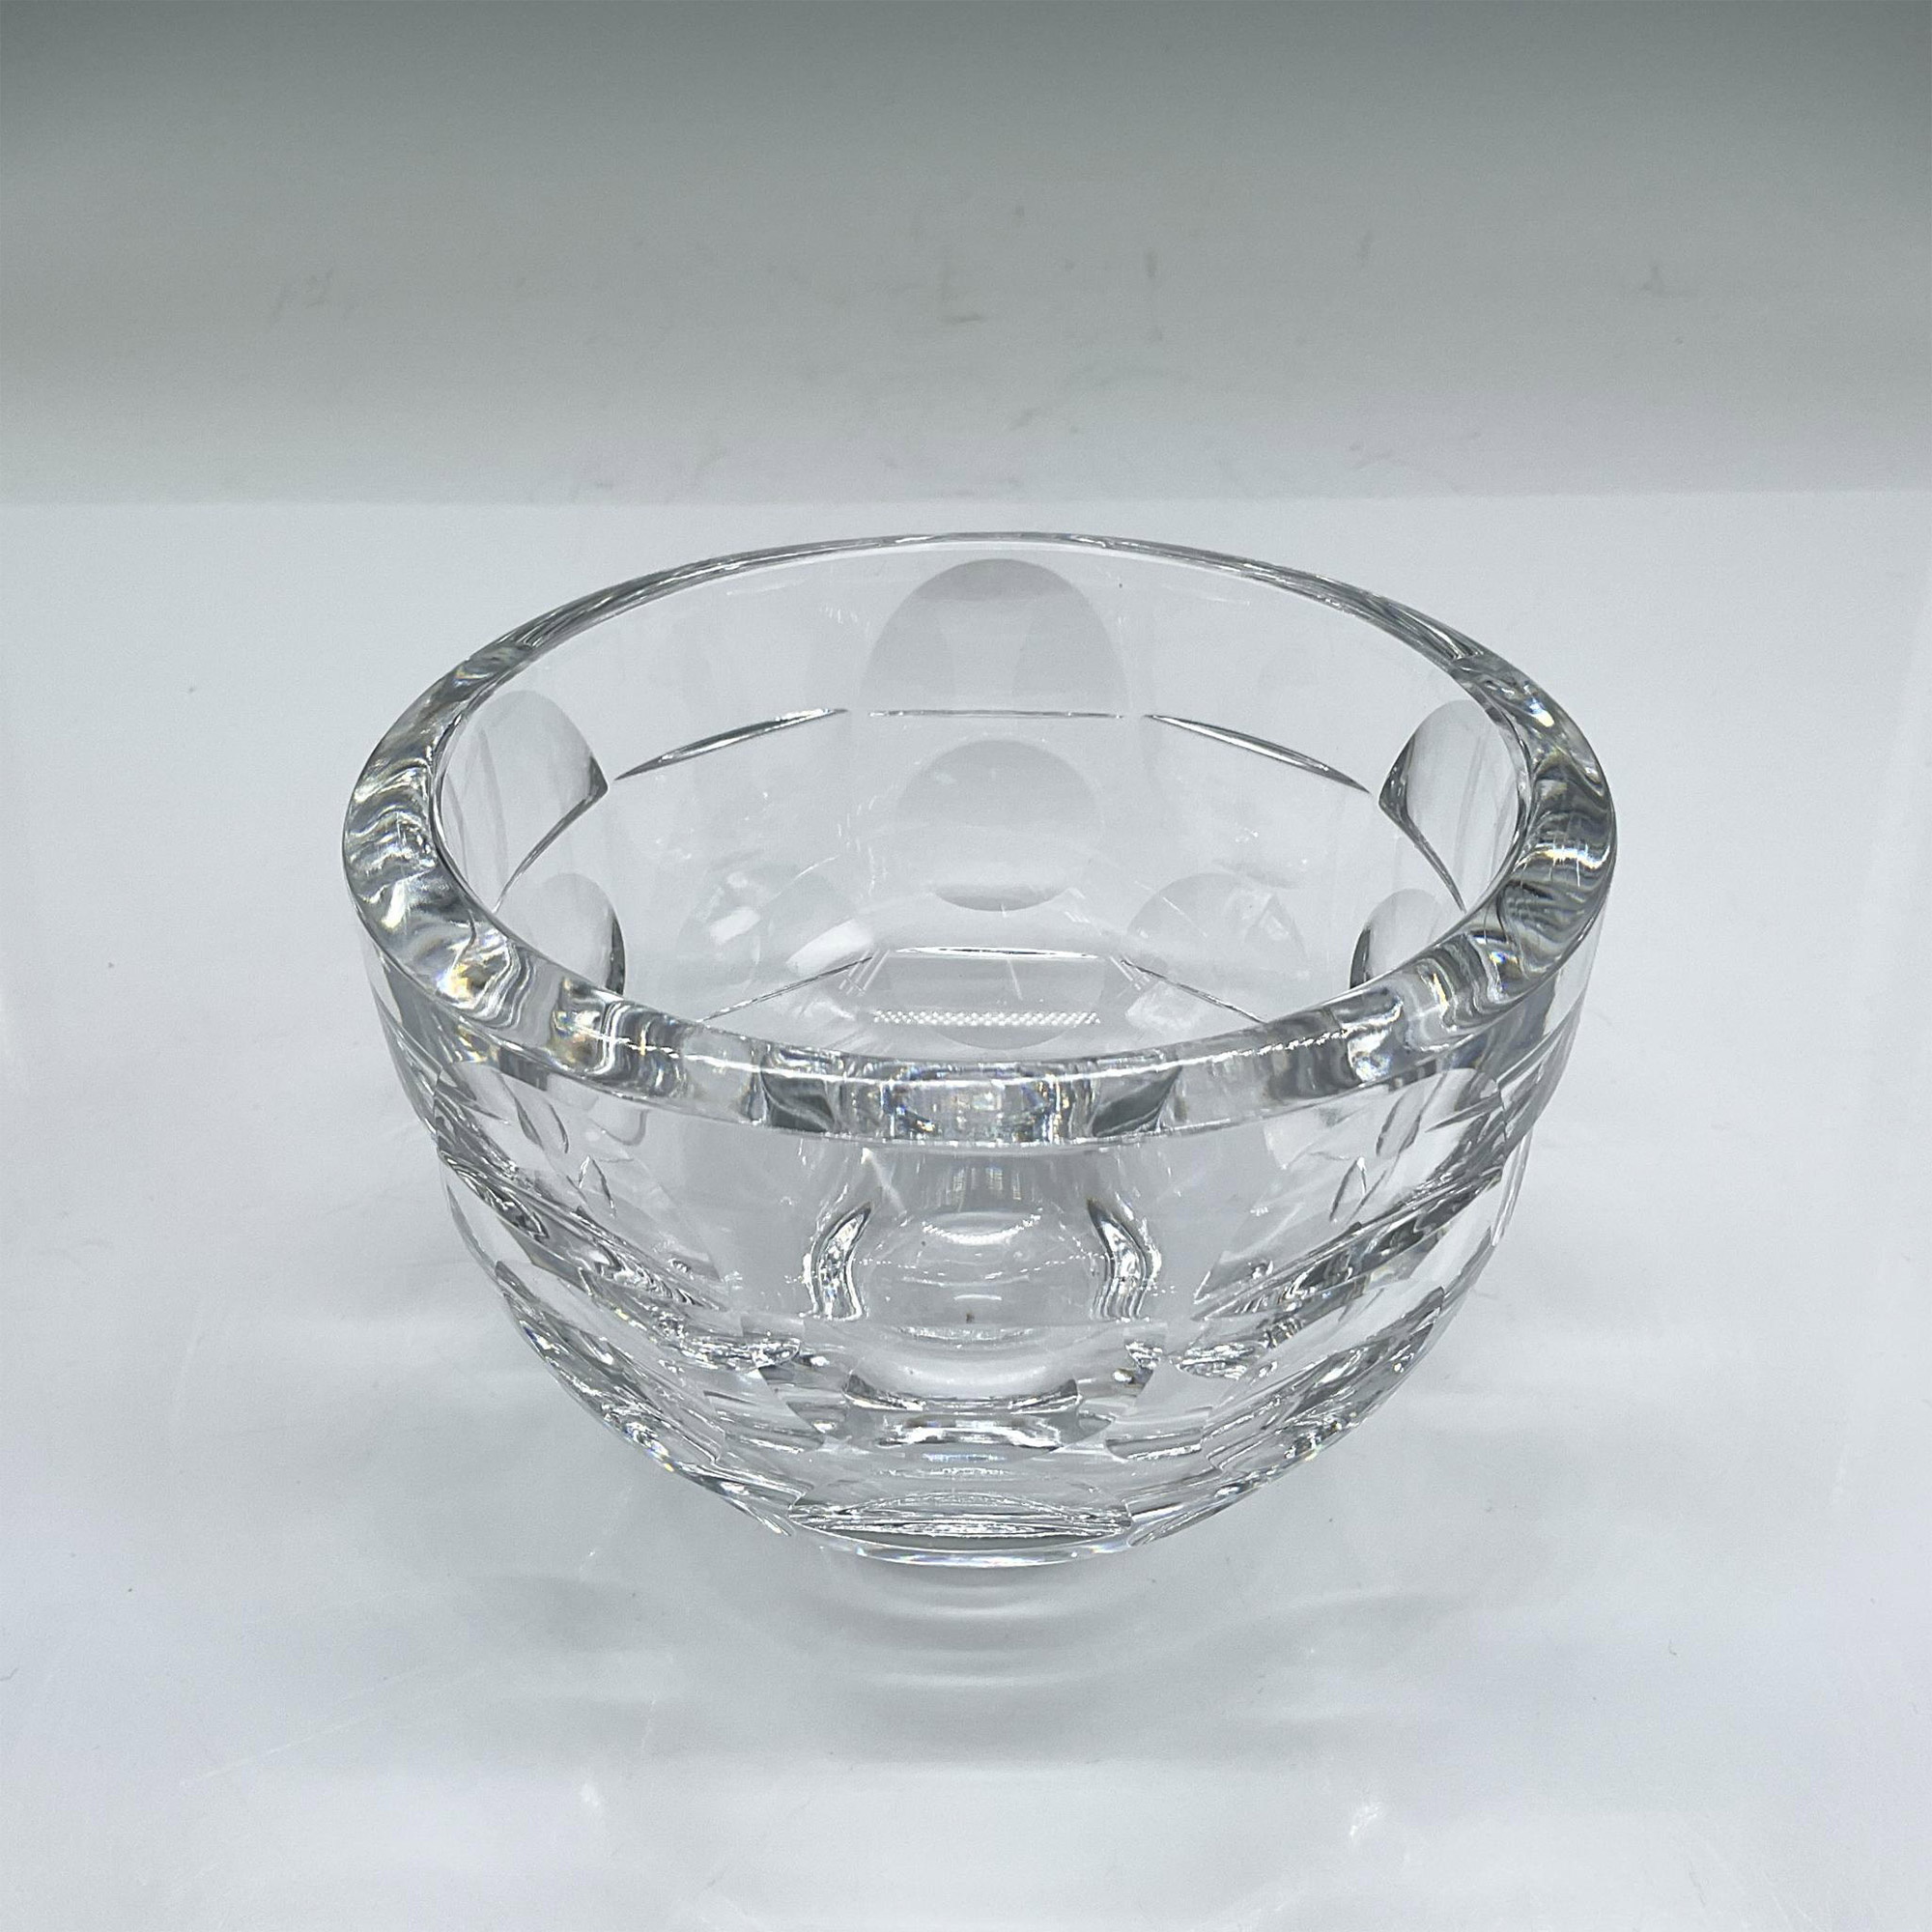 Orrefors Crystal Bowl, Swirl and Dots - Image 2 of 3